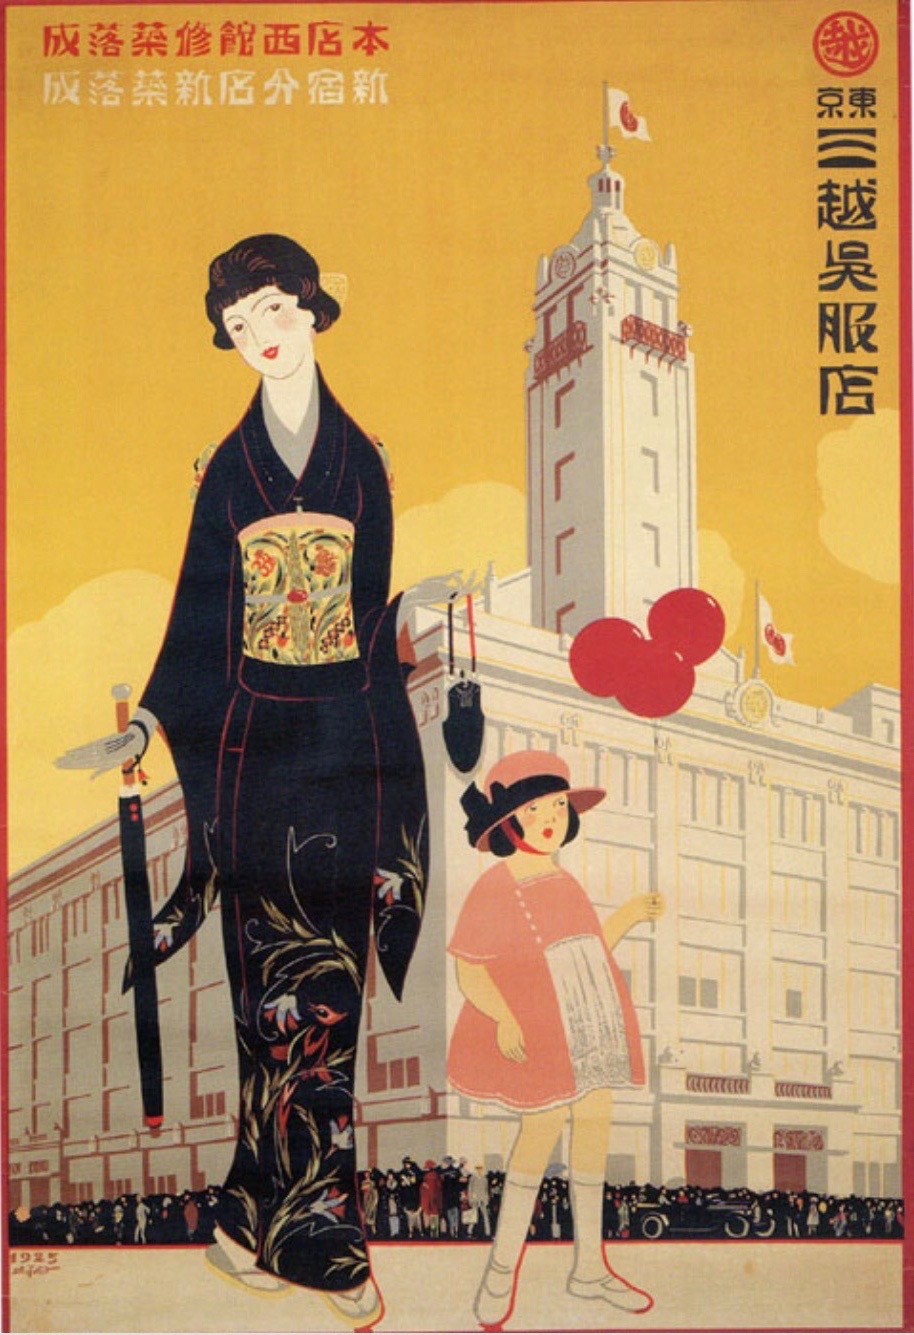 illustrative poster of a mother and child walking across a bustling city square